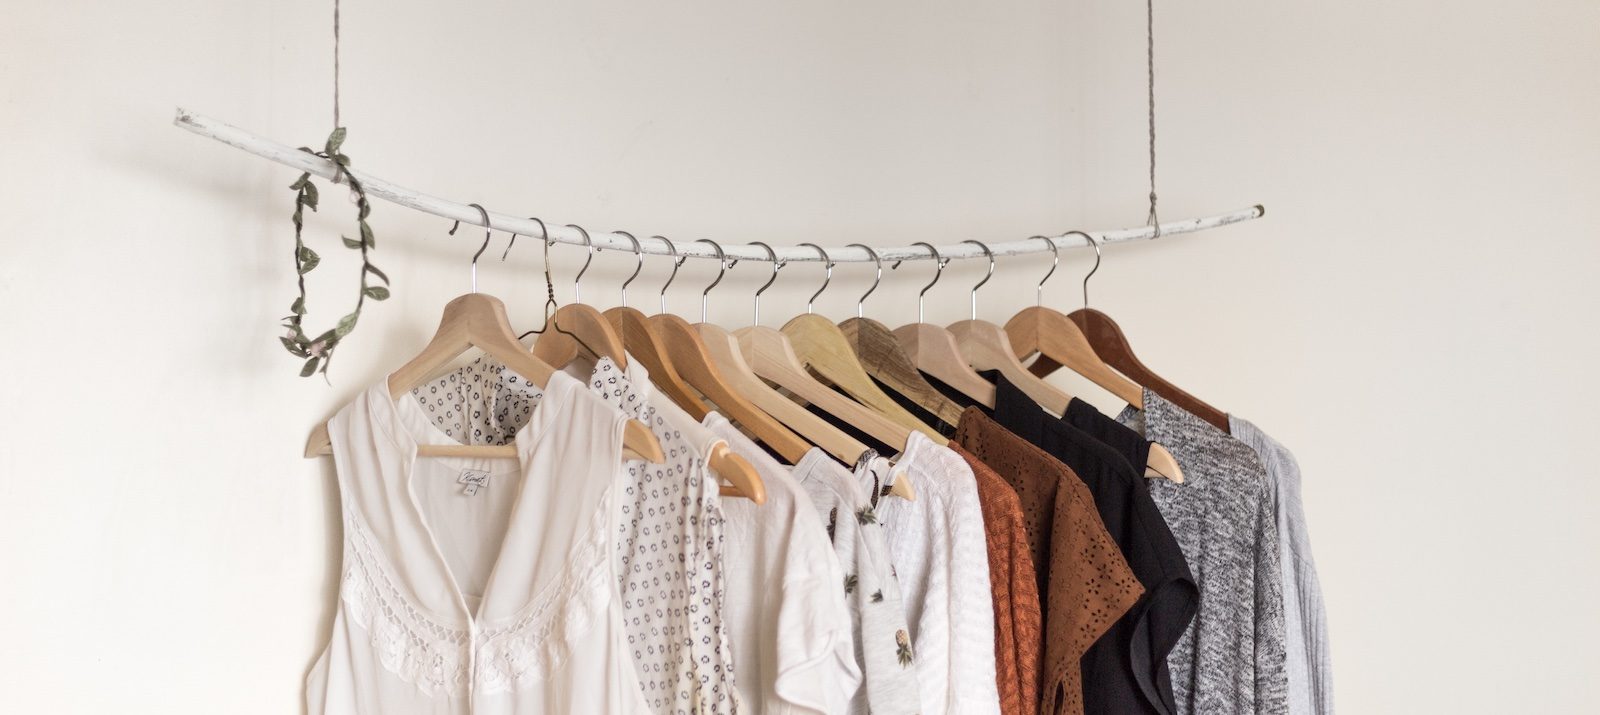 Here's a little trick I use to keep hangers organized while moving